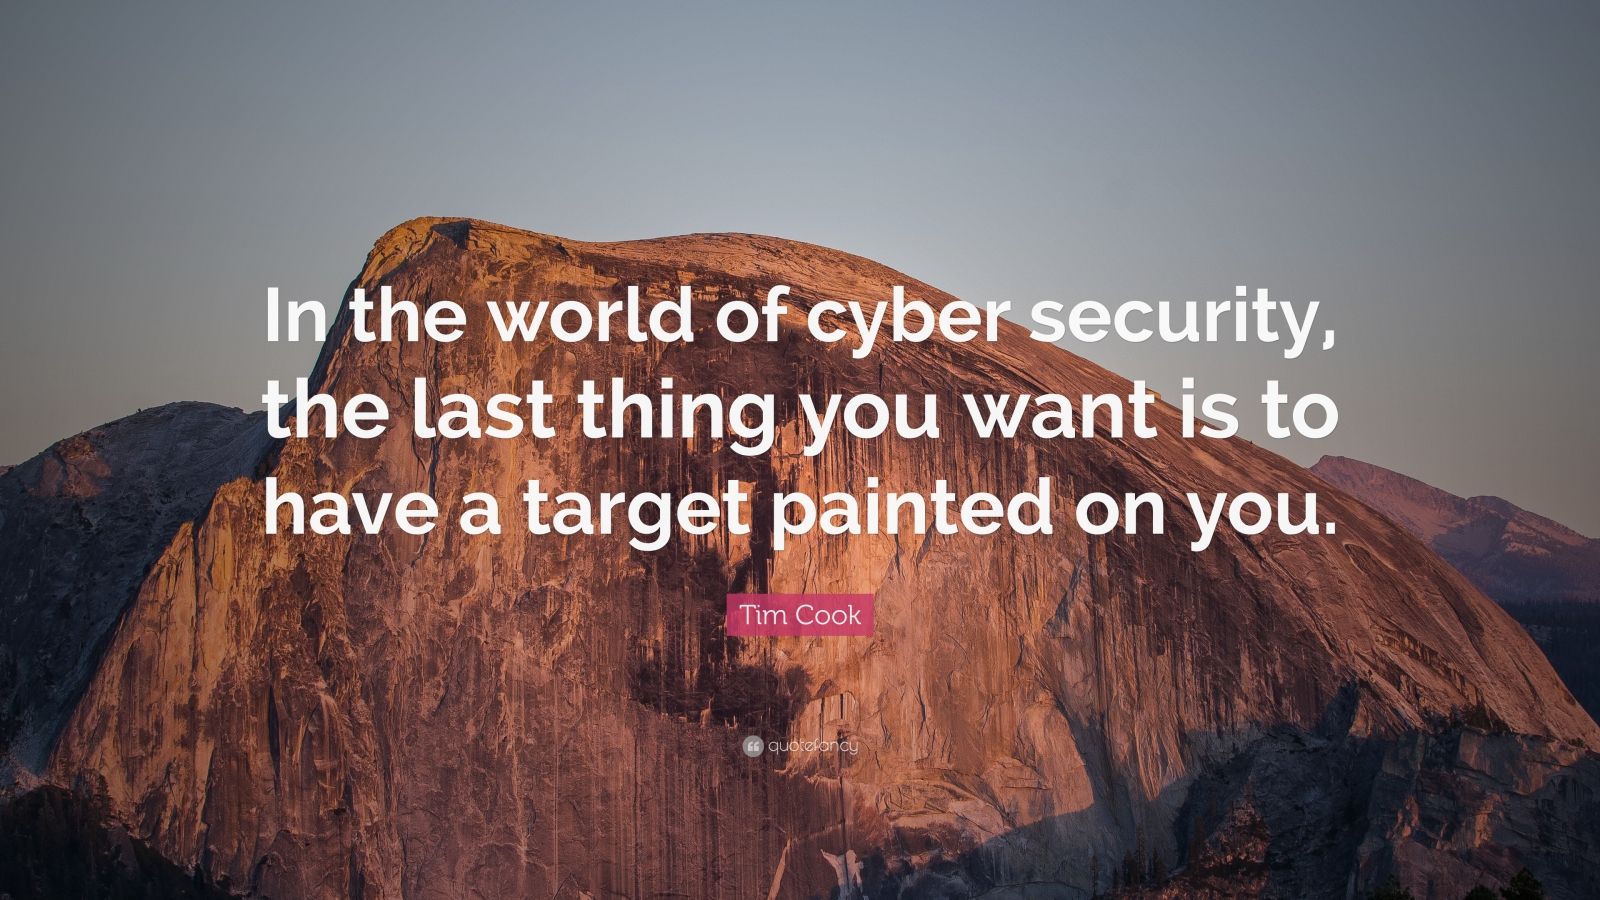 Tim Cook Quote “In the world of cyber security, the last